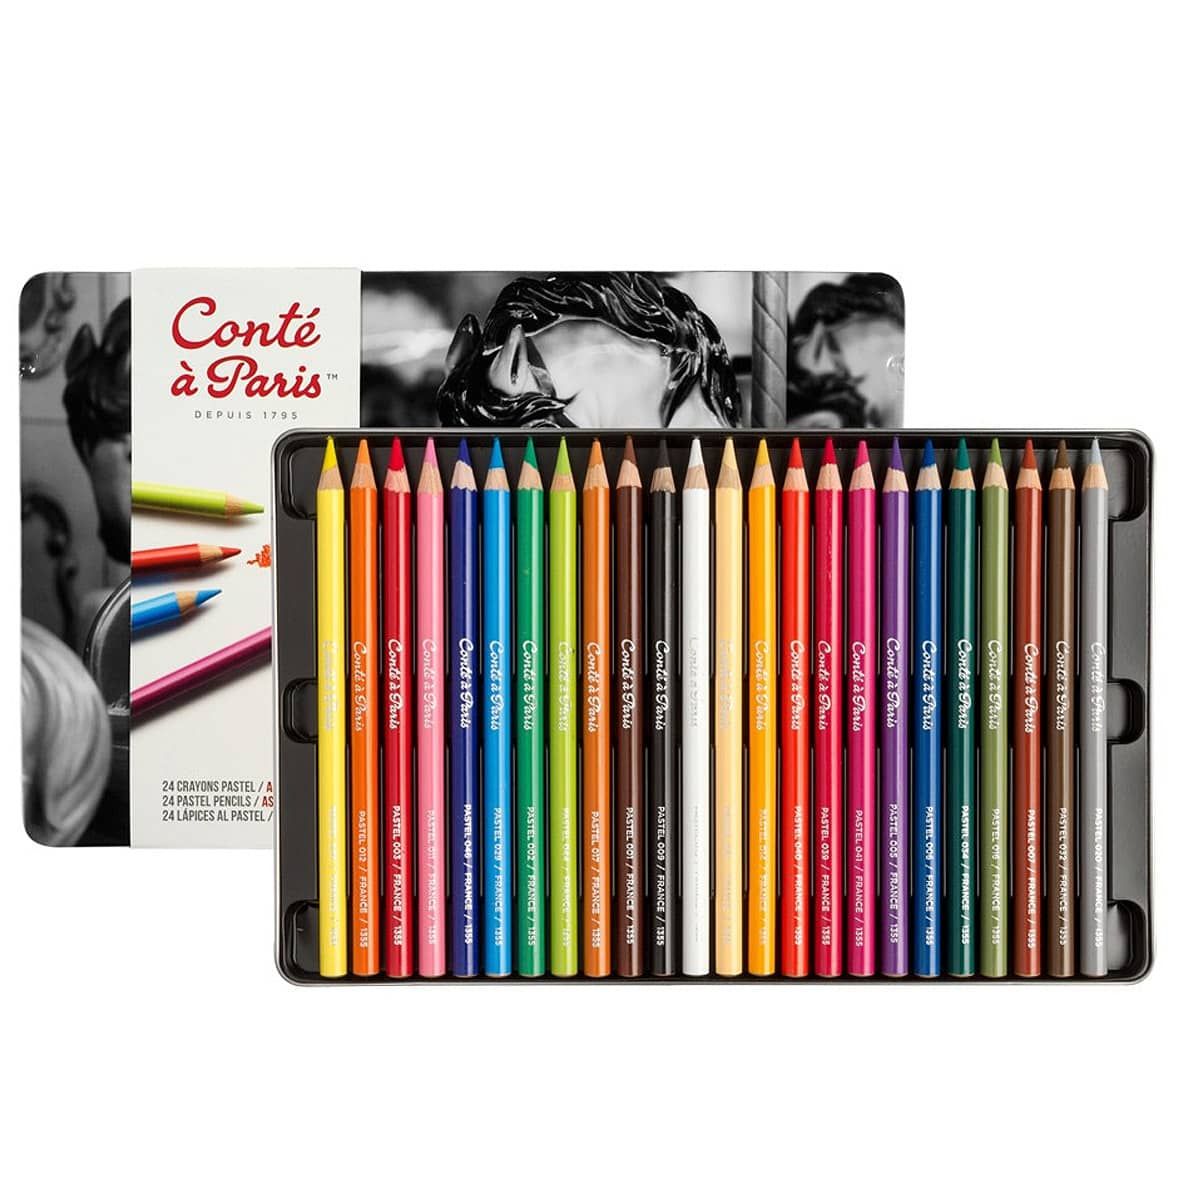 Conte Pastel Pencil Sets - 12 Assorted Colors in a Tin Box